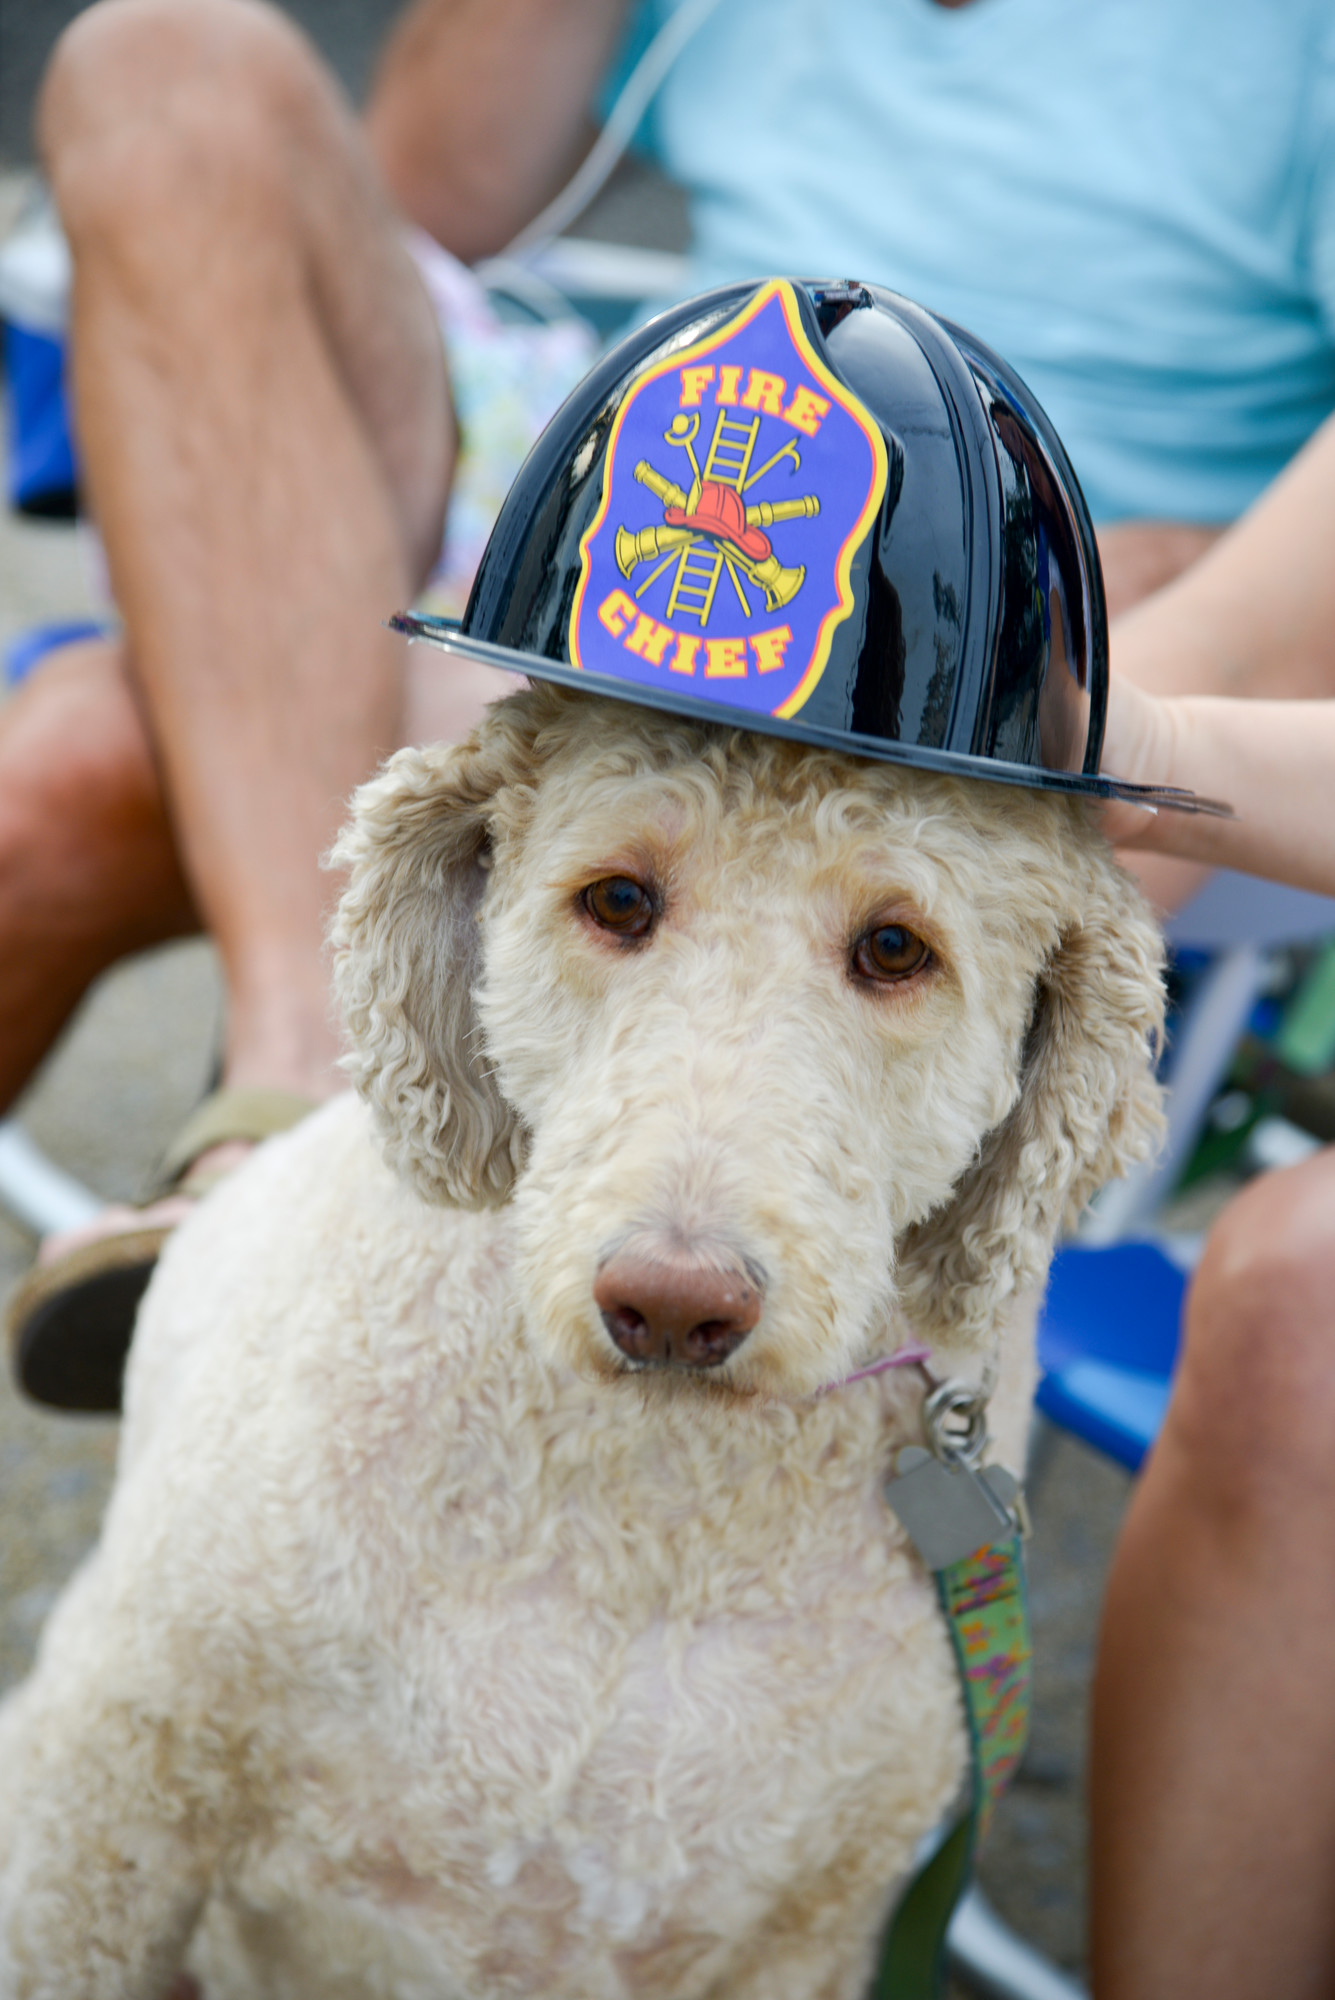 Sadie the dog wore a firefighter’s helmet.